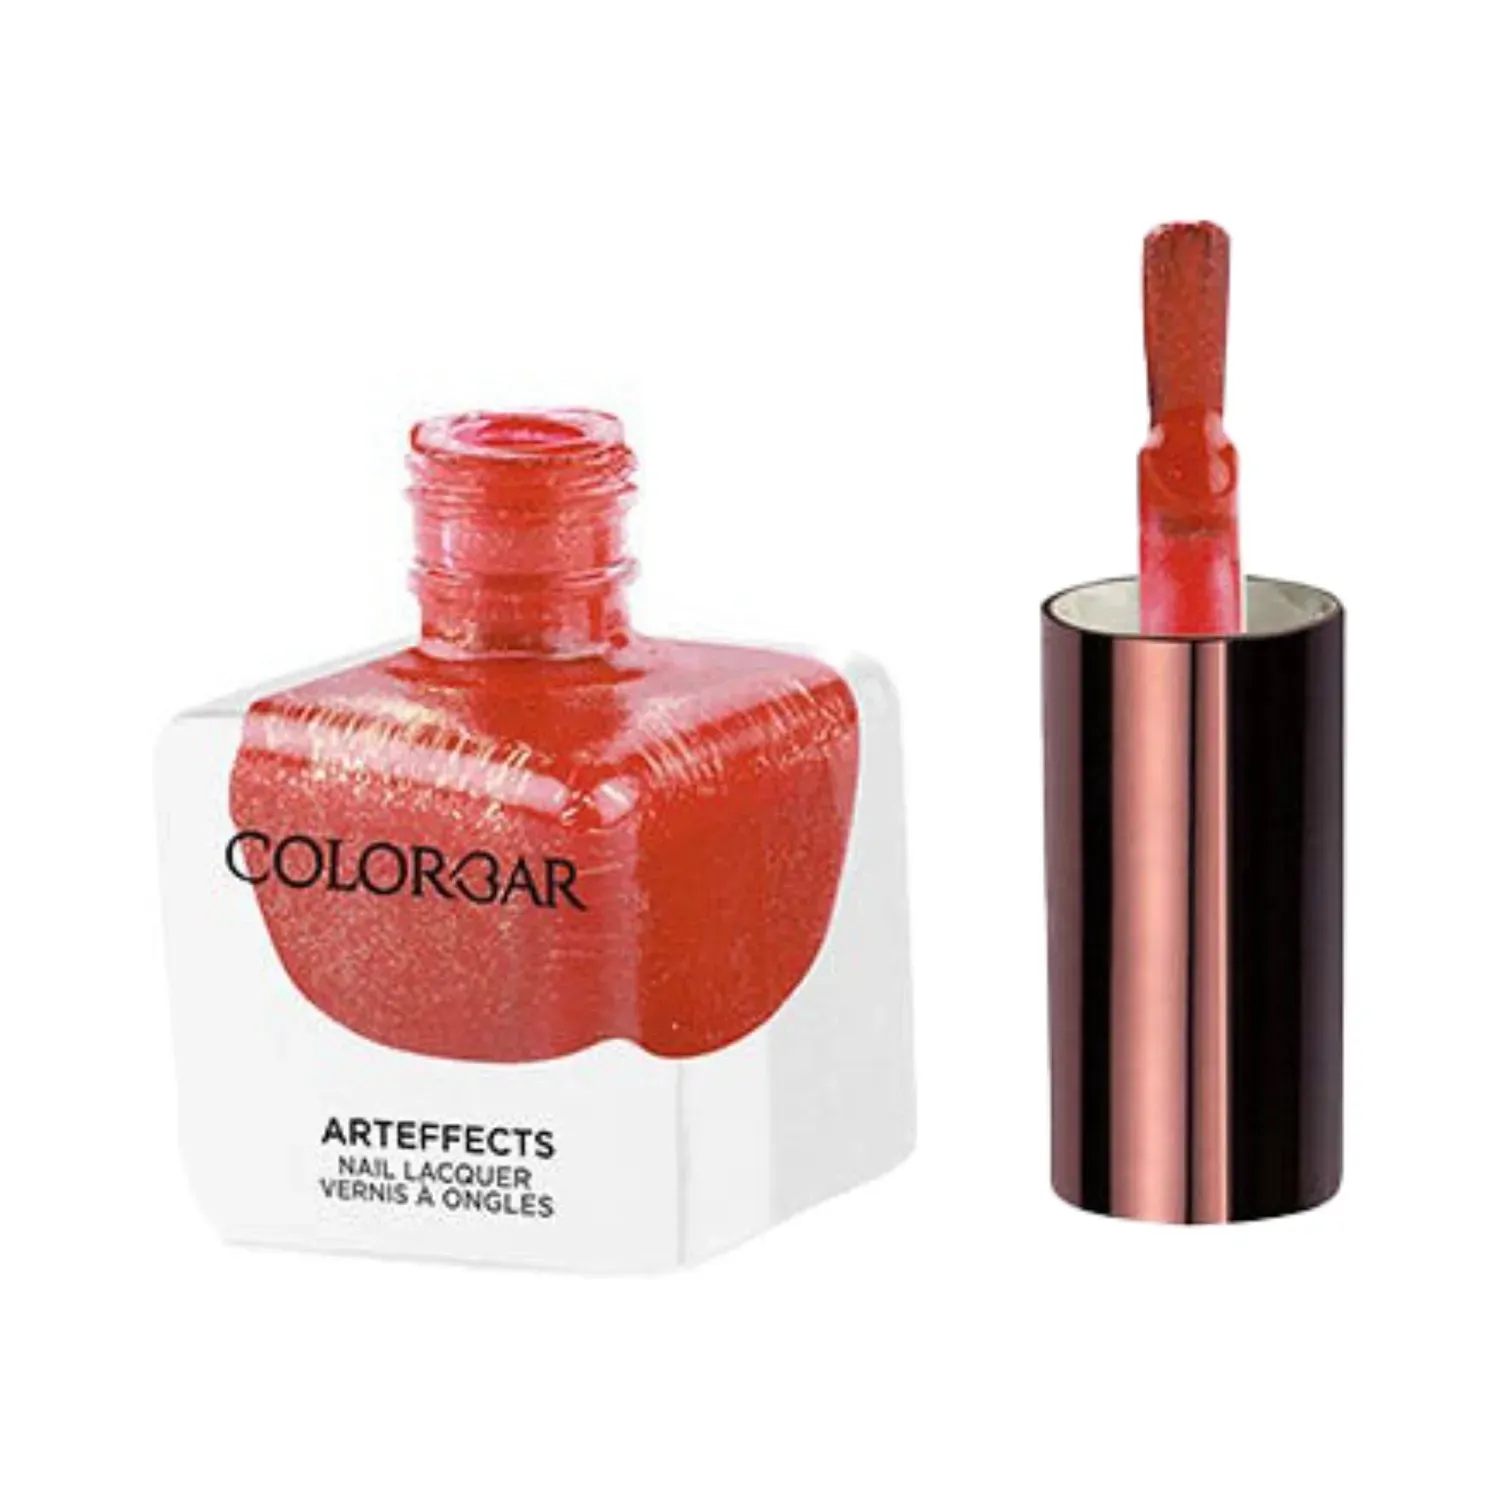 Colorbar | Colorbar Art Effects Nail Lacquer - 1316 Ablaze (12ml)